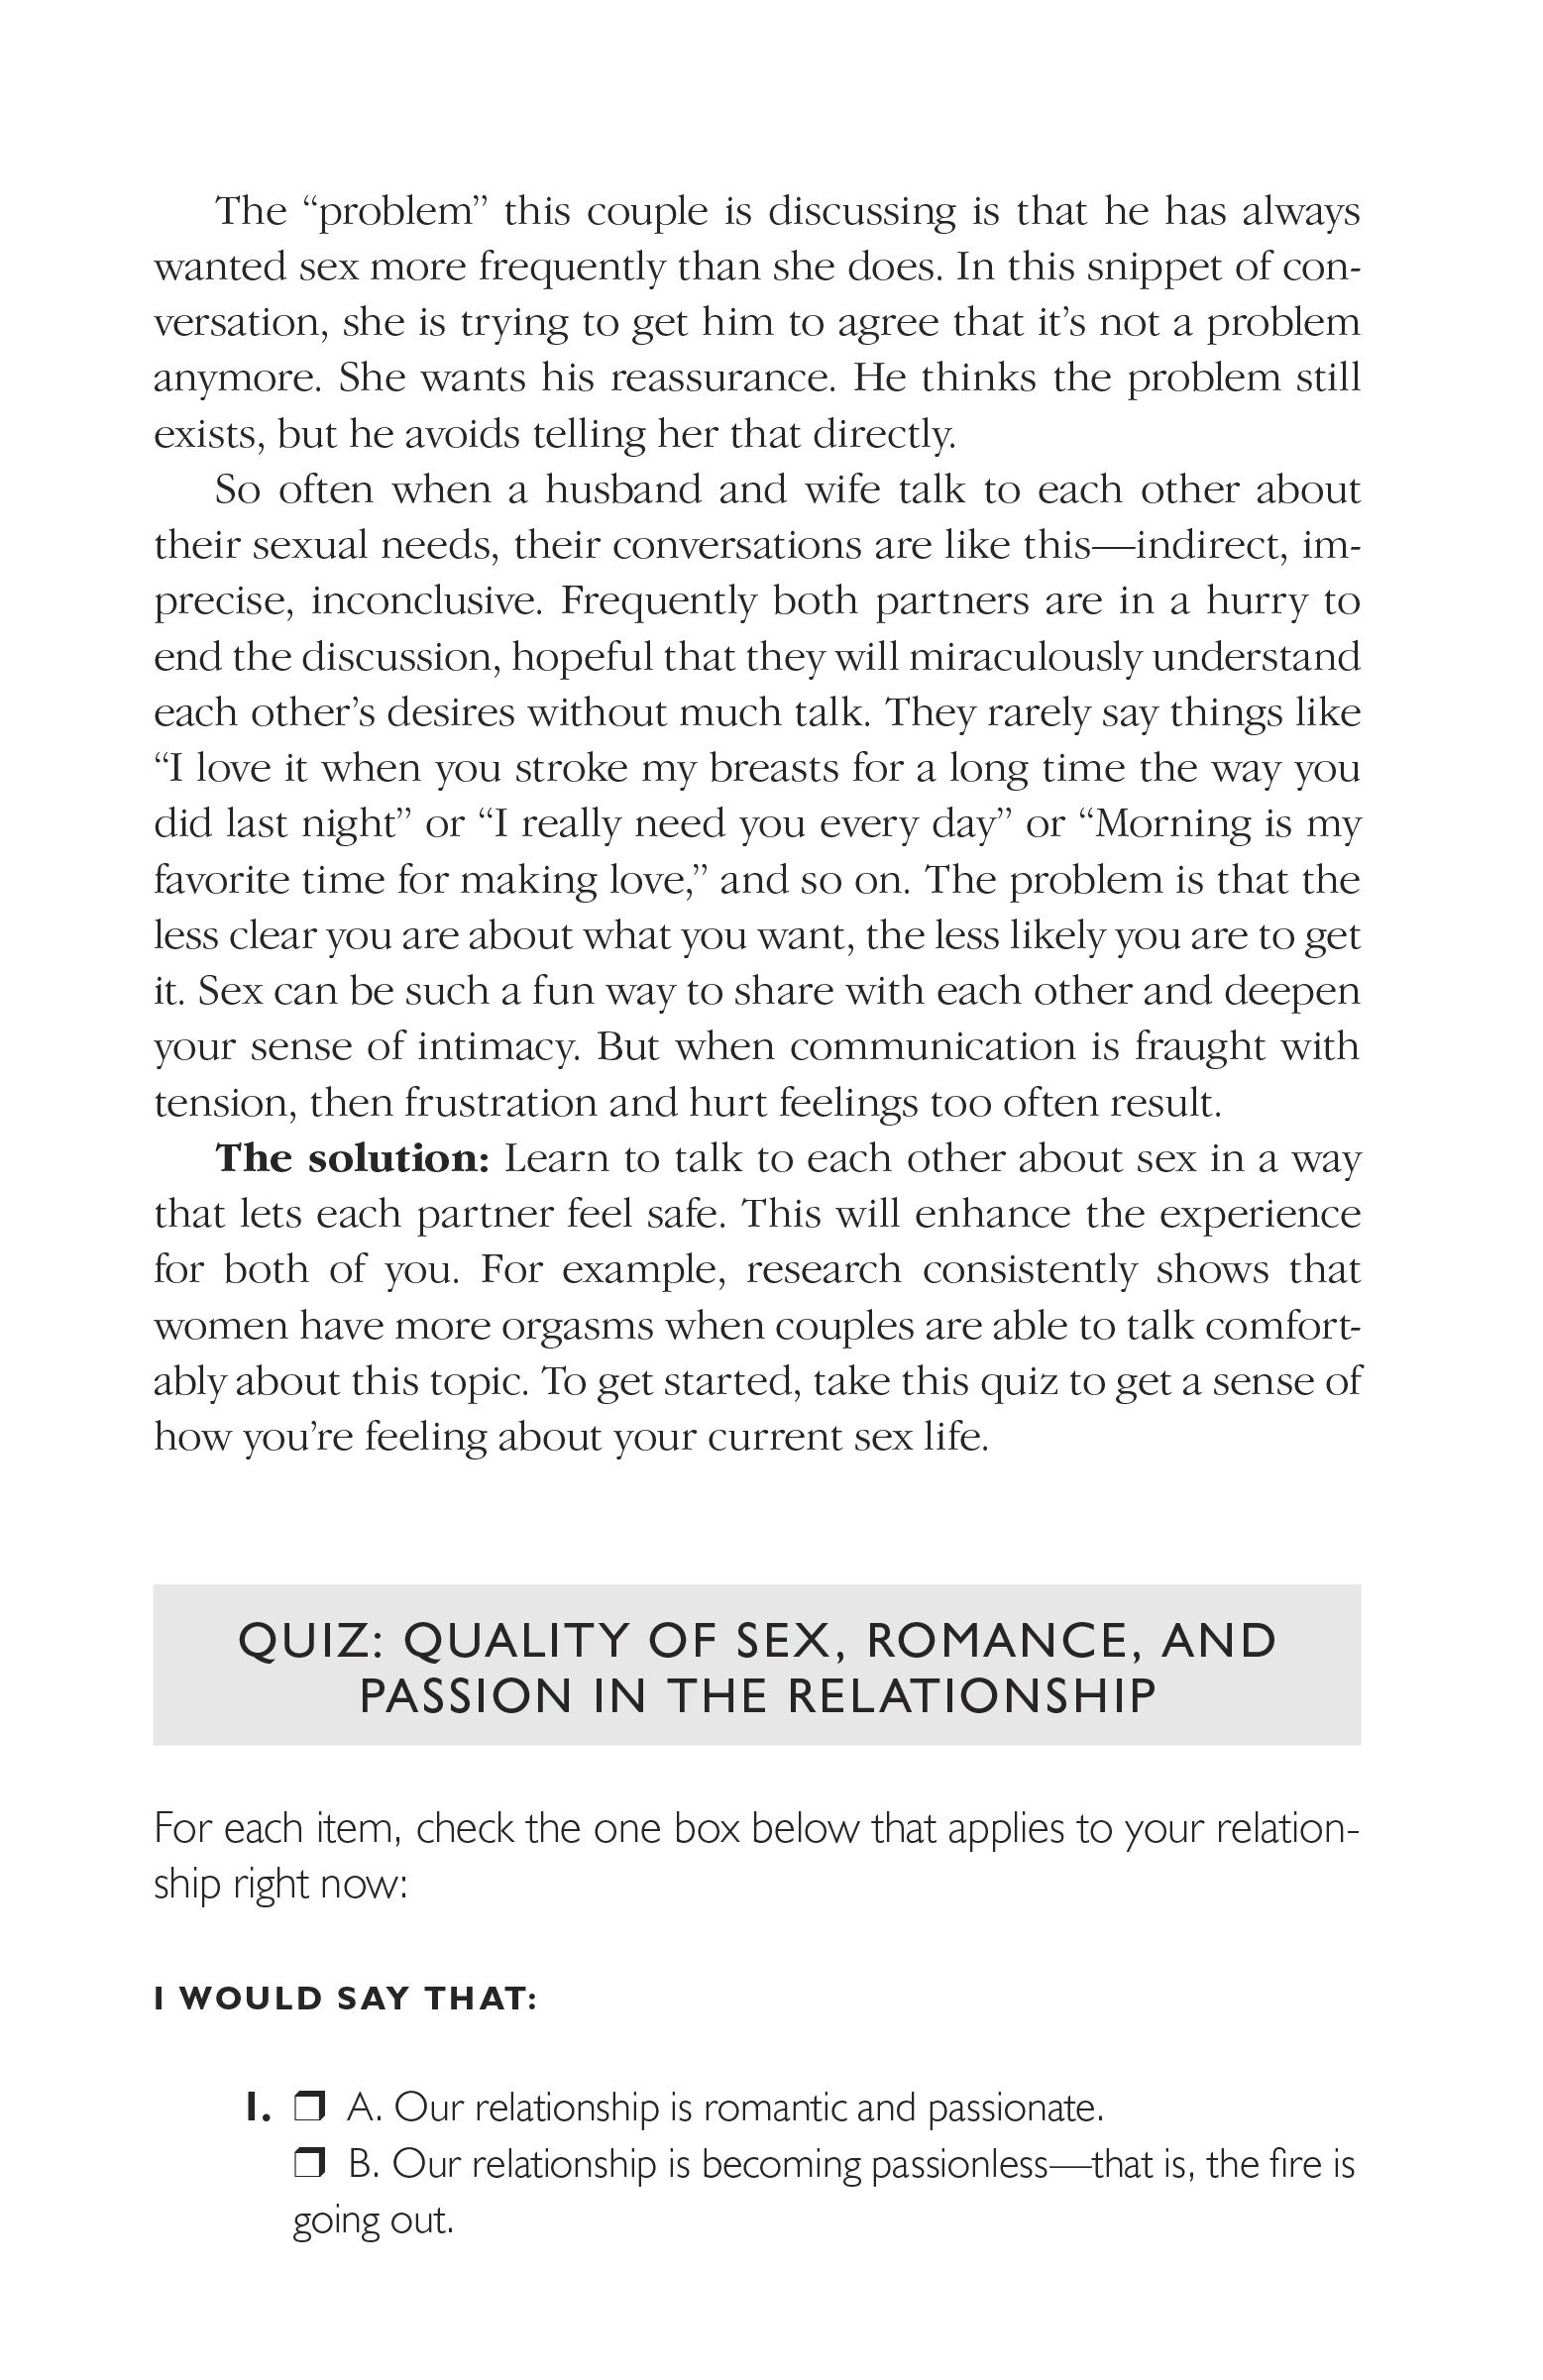 Extended Ebook Content For The Seven Principles For Making Marriage Work Quiz Quality Of Sex